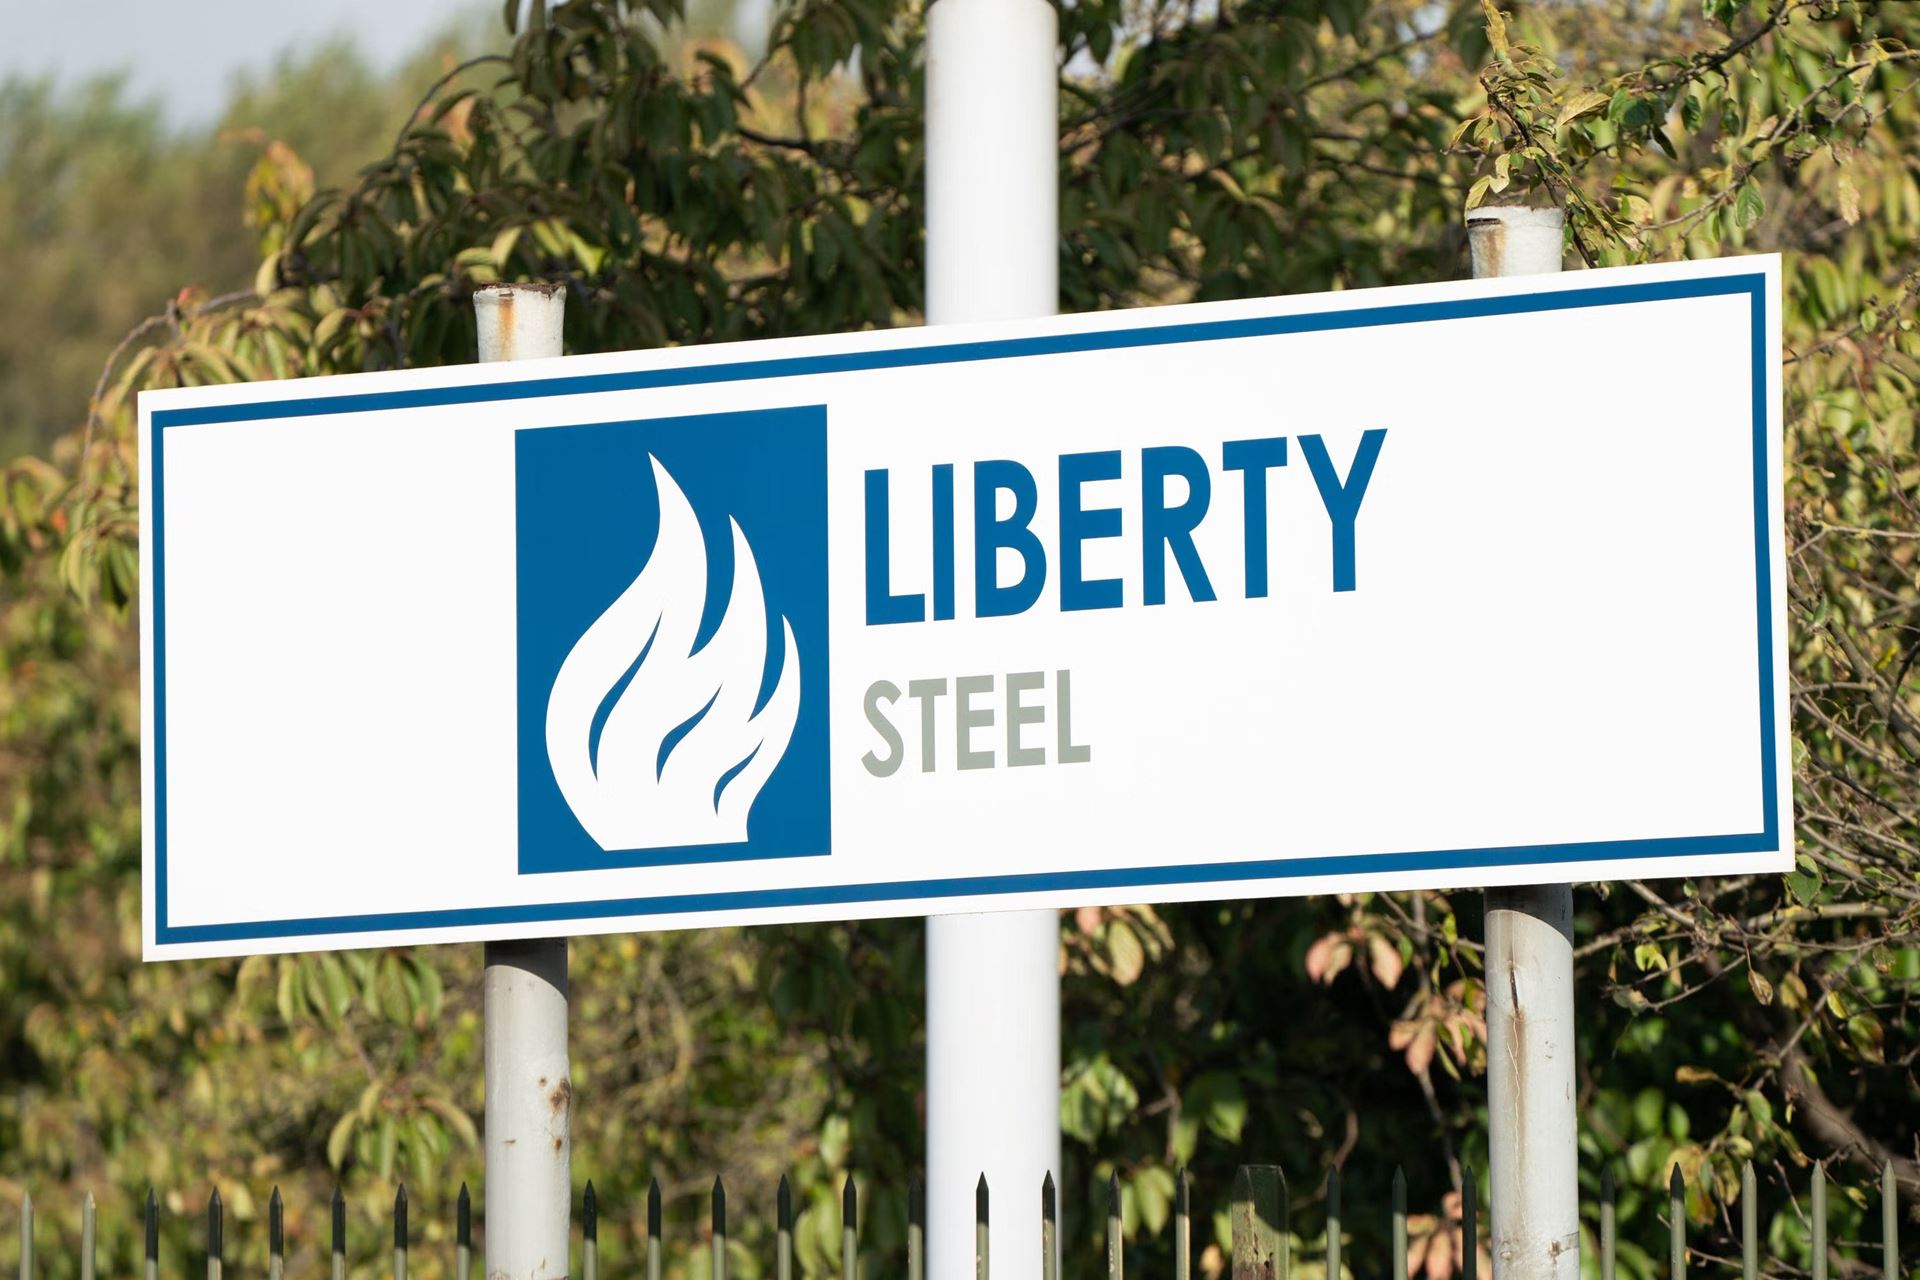 Liberty Steel announced that Hungary's Dunaferr will prepare for green transformation